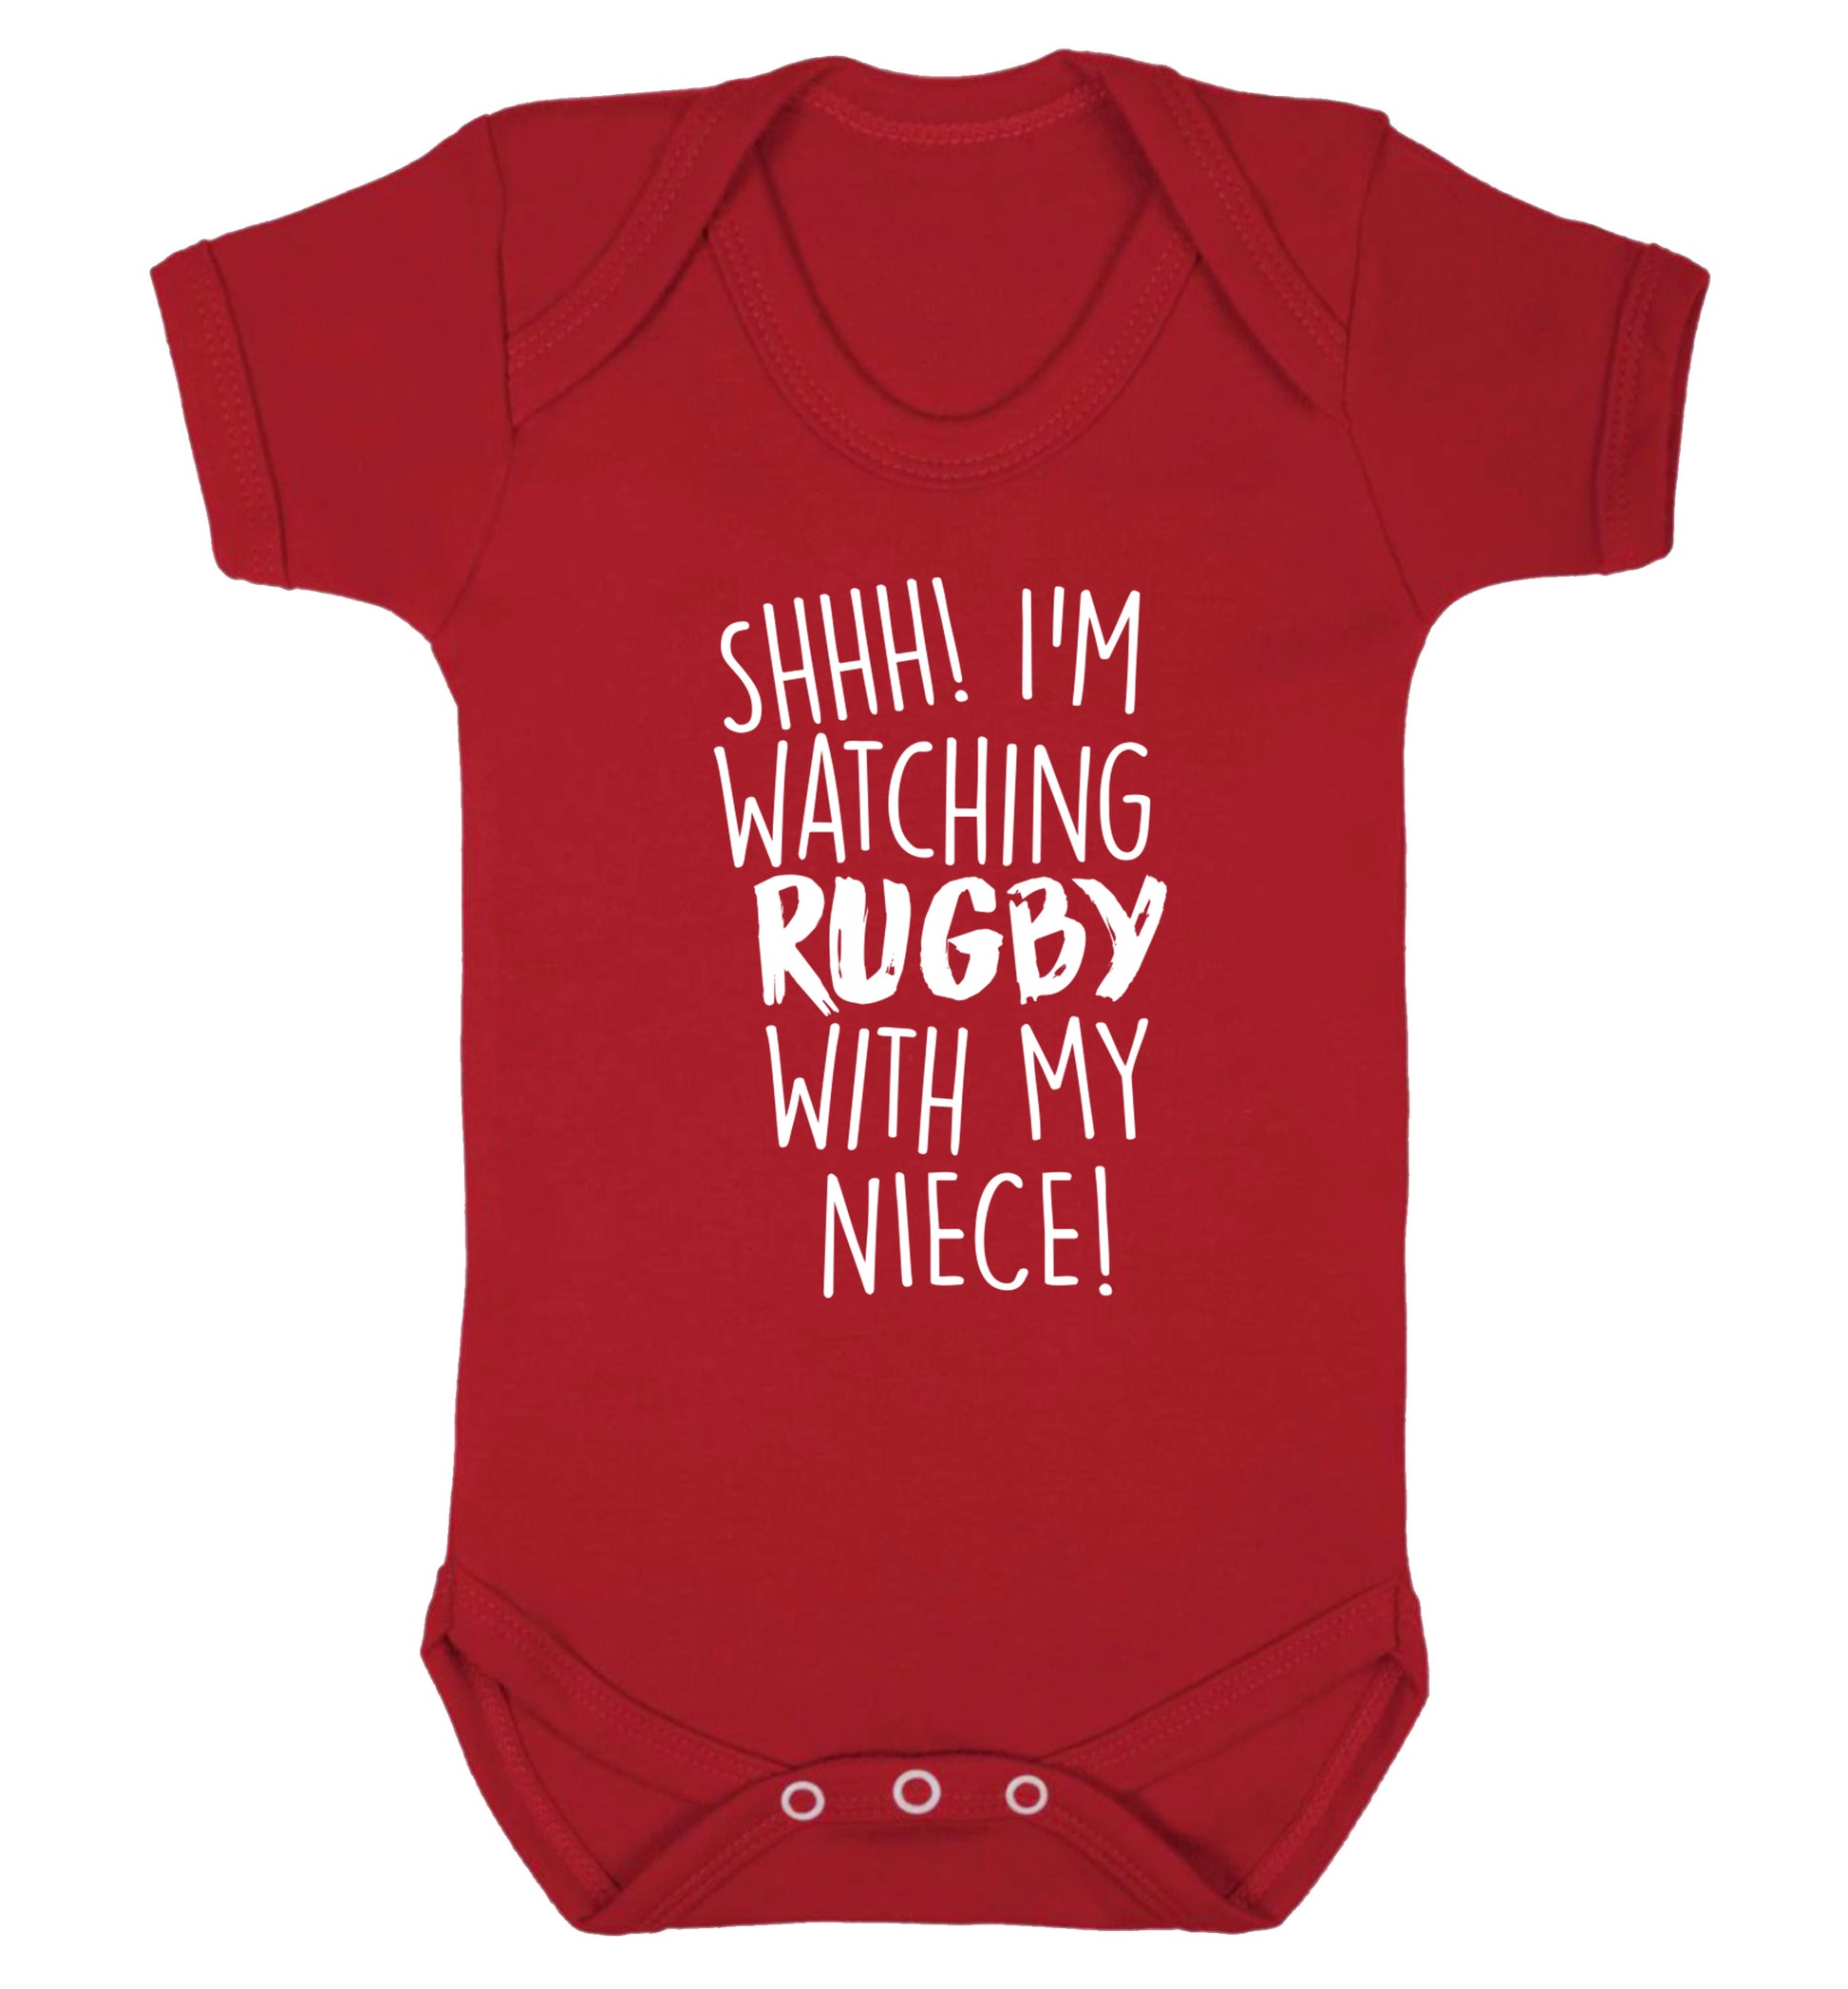 Shh.. I'm watching rugby with my niece Baby Vest red 18-24 months